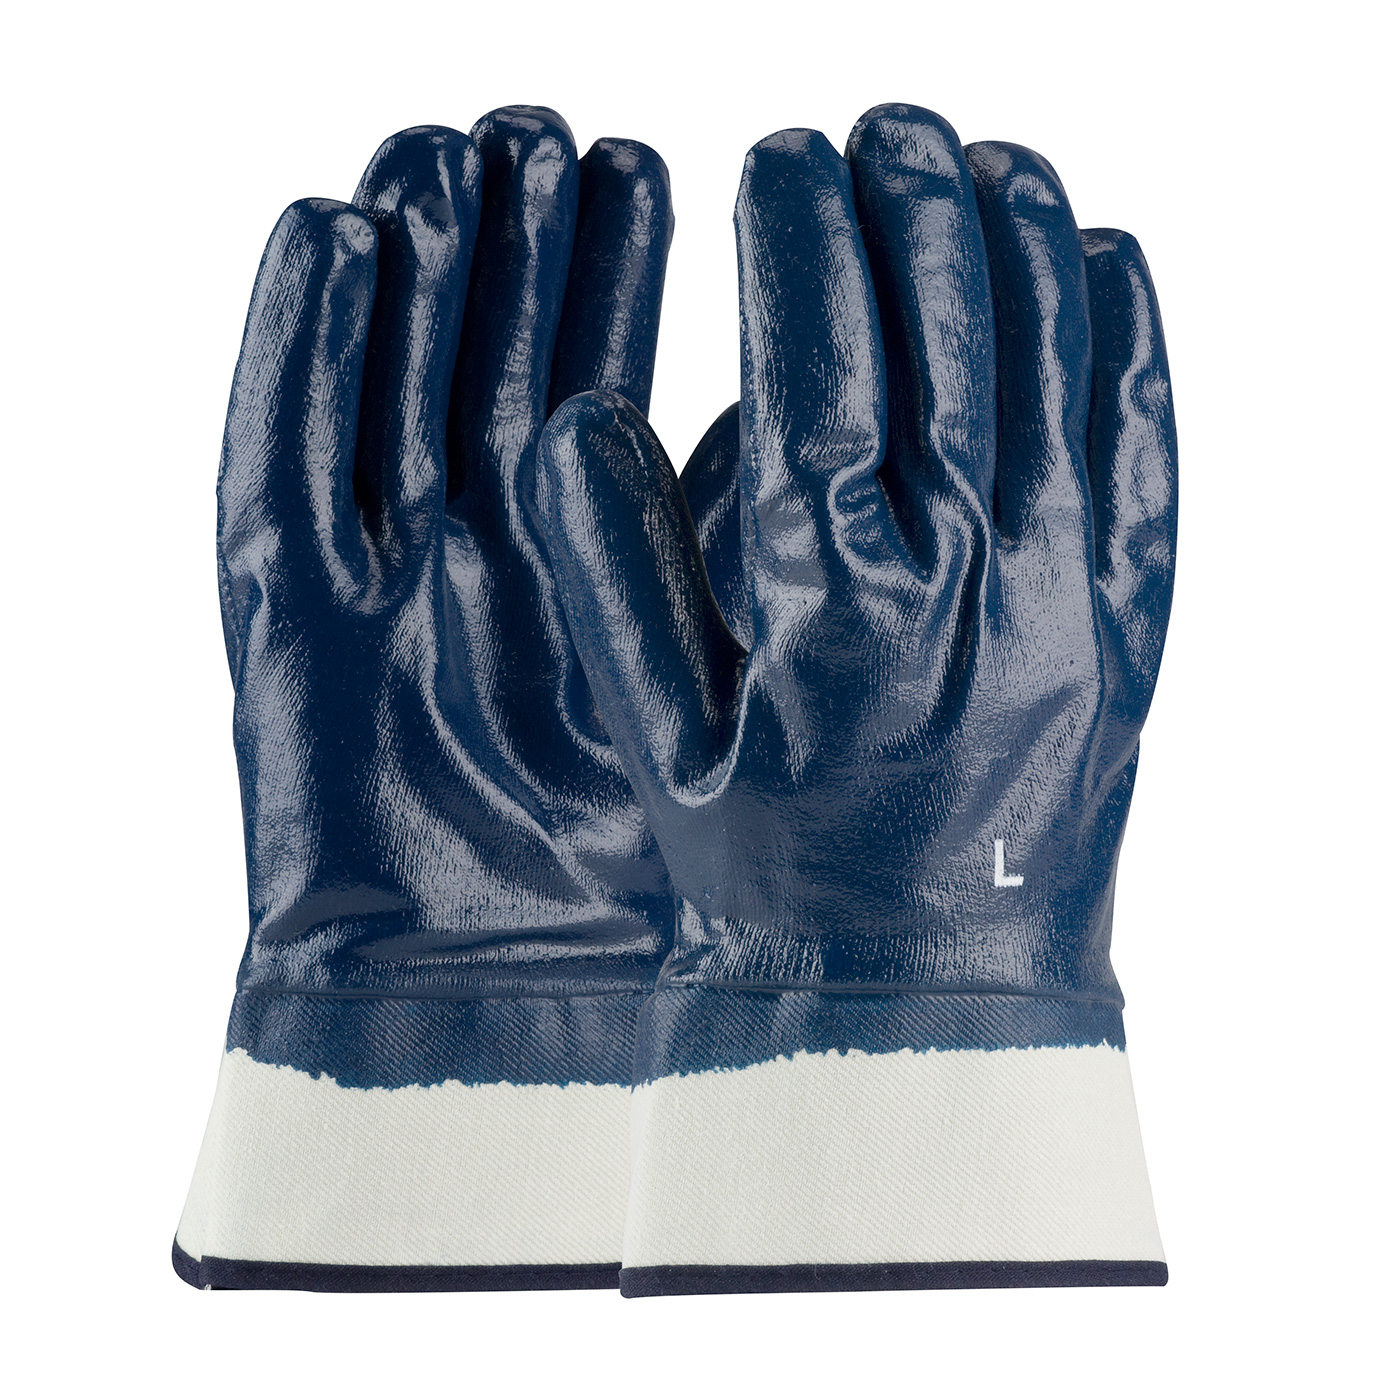 56-3154 PIP® ArmorGrip® Jersey Lined Full Nitrile Dipped Glove with Smooth Grip Texture and Safety Cuff